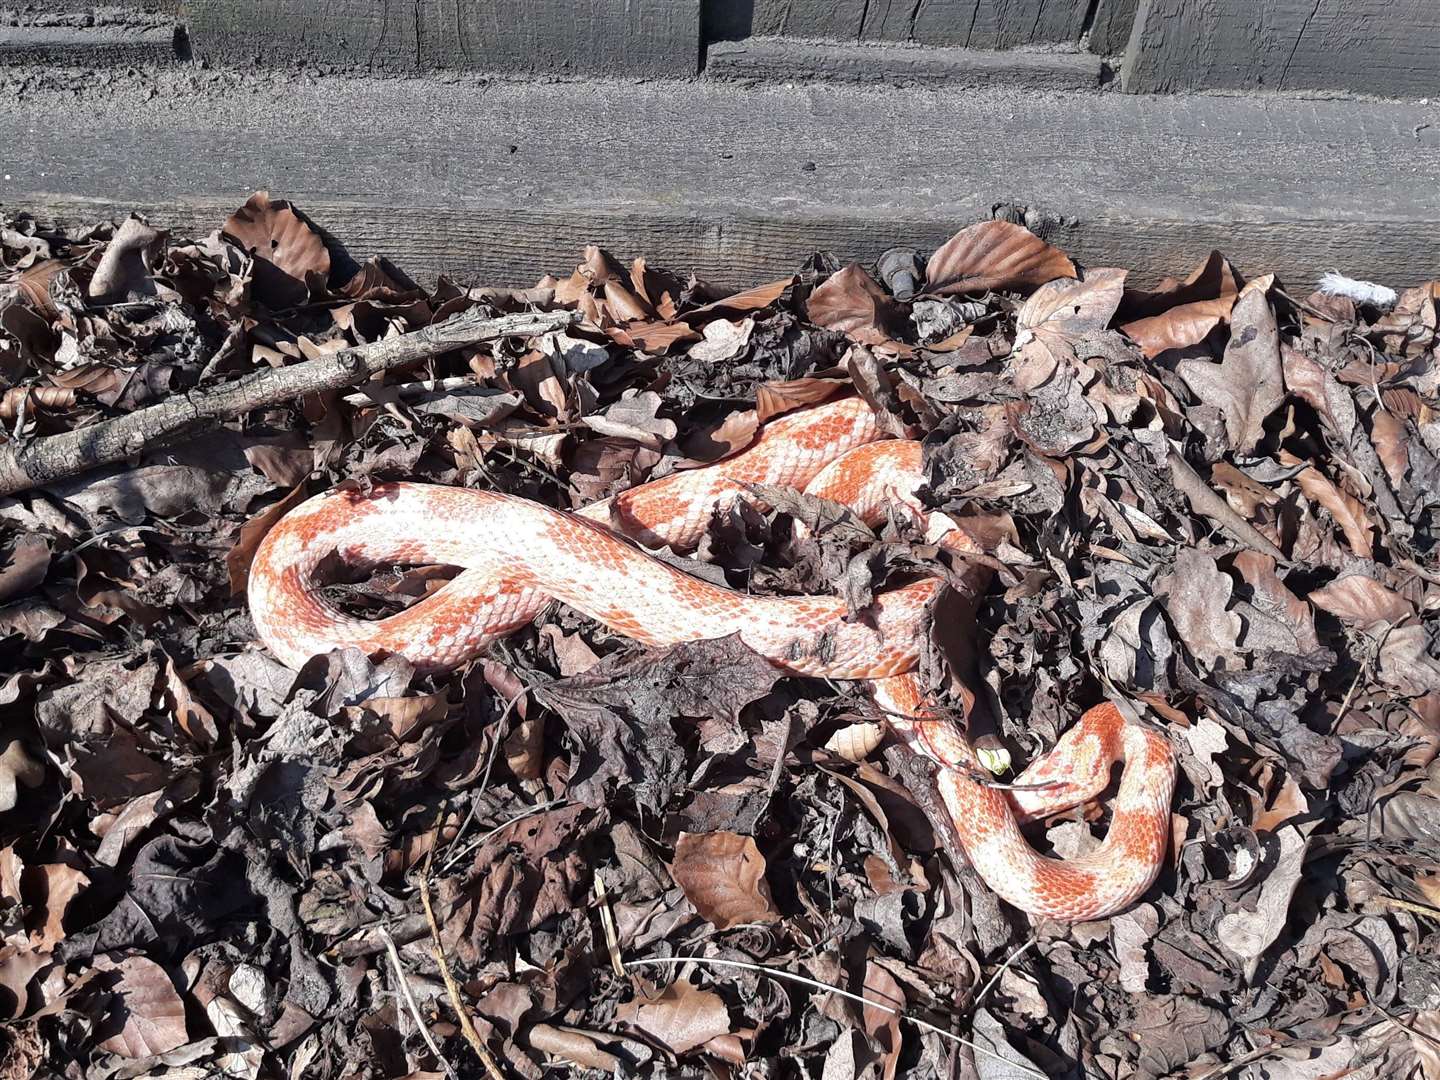 The corn snake found on the M25